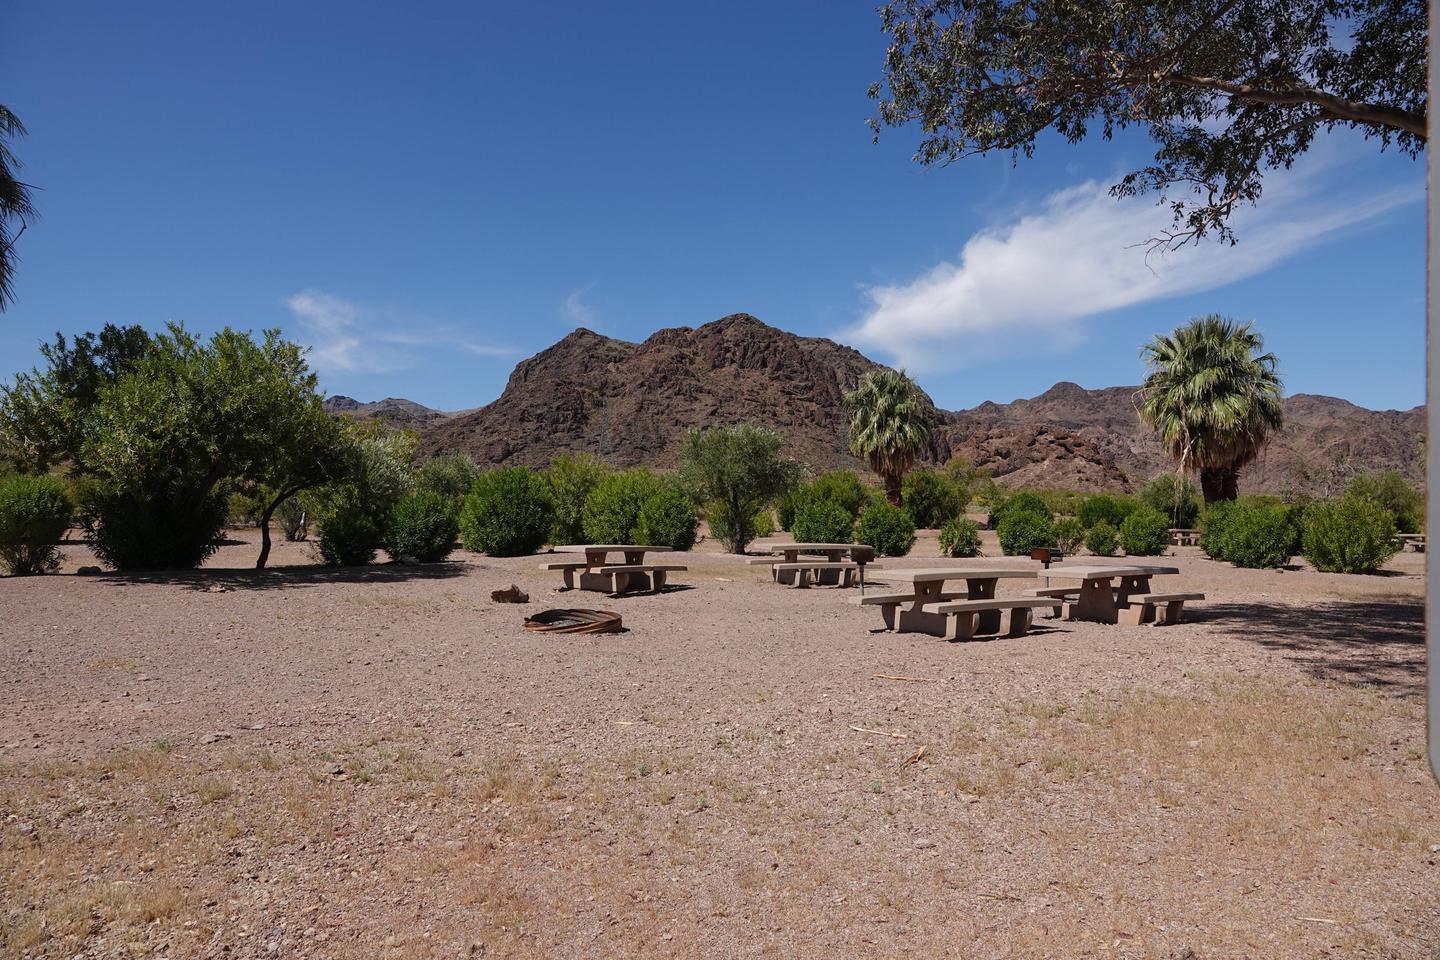 Open Campsitewith tables located in a desert settingBoulder Beach Group Site 2